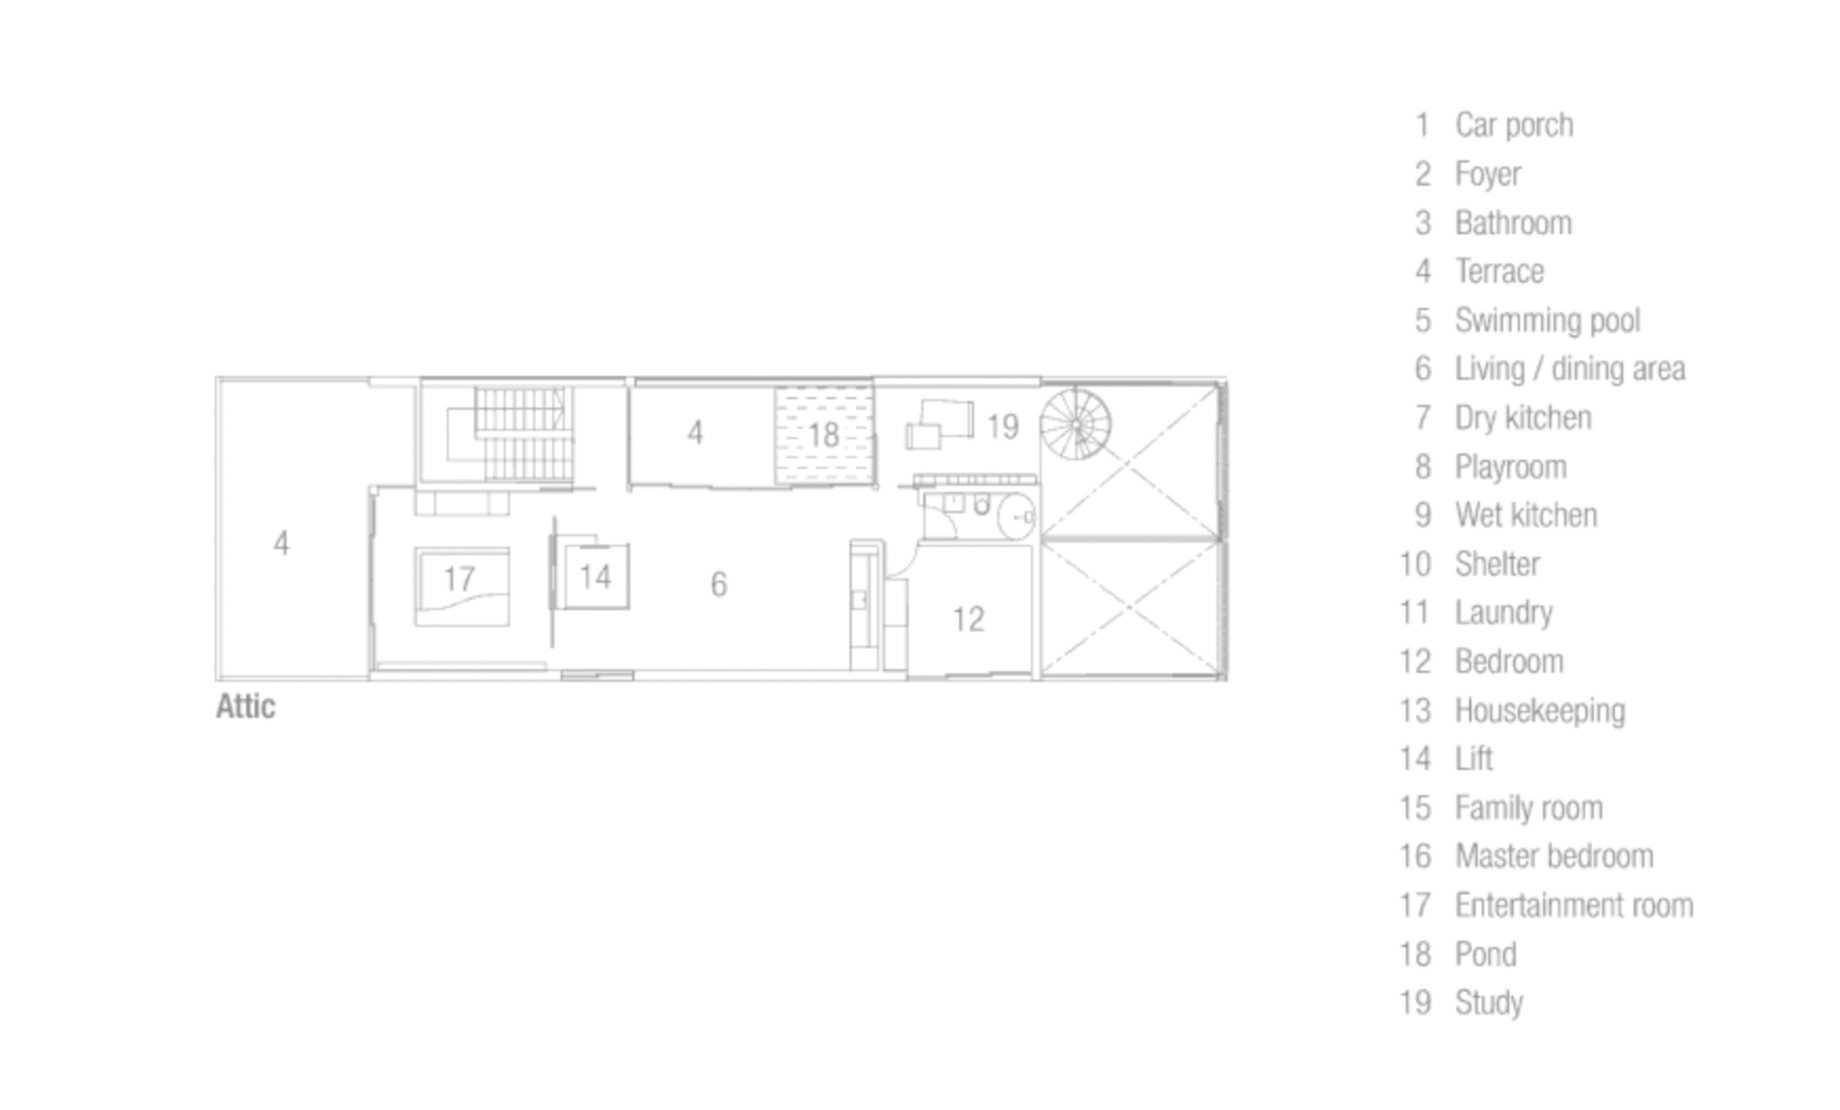 Attic Floor Plan - Discreetly Detached Luxury Home - Princess of Whales Rd, Singapore